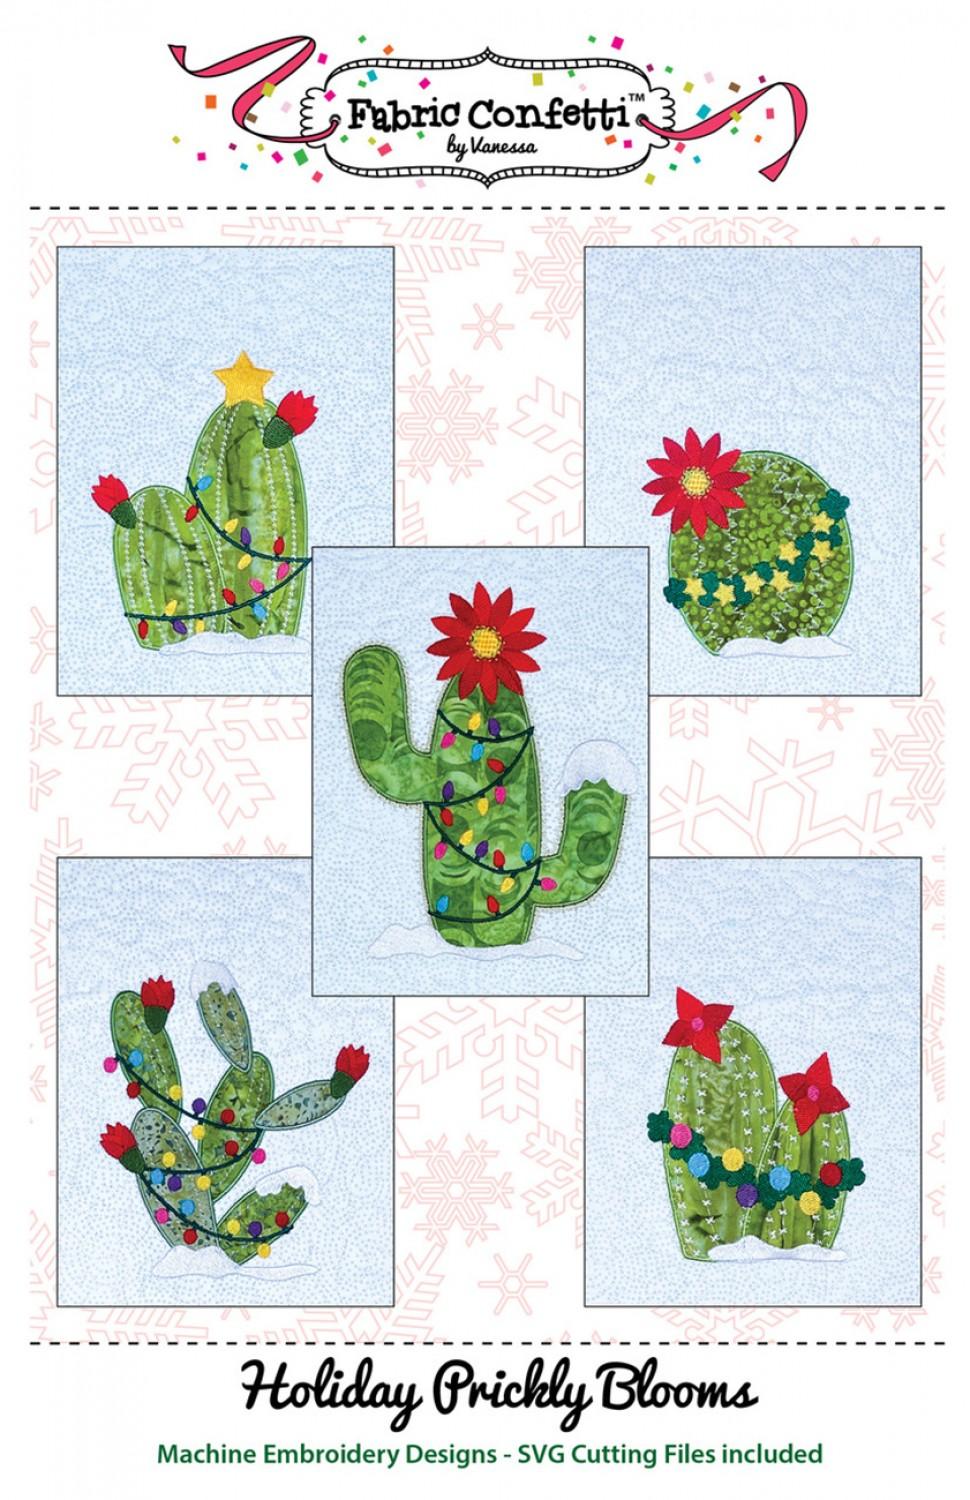 Holiday Prickly Bloomsby Fabric Confetti